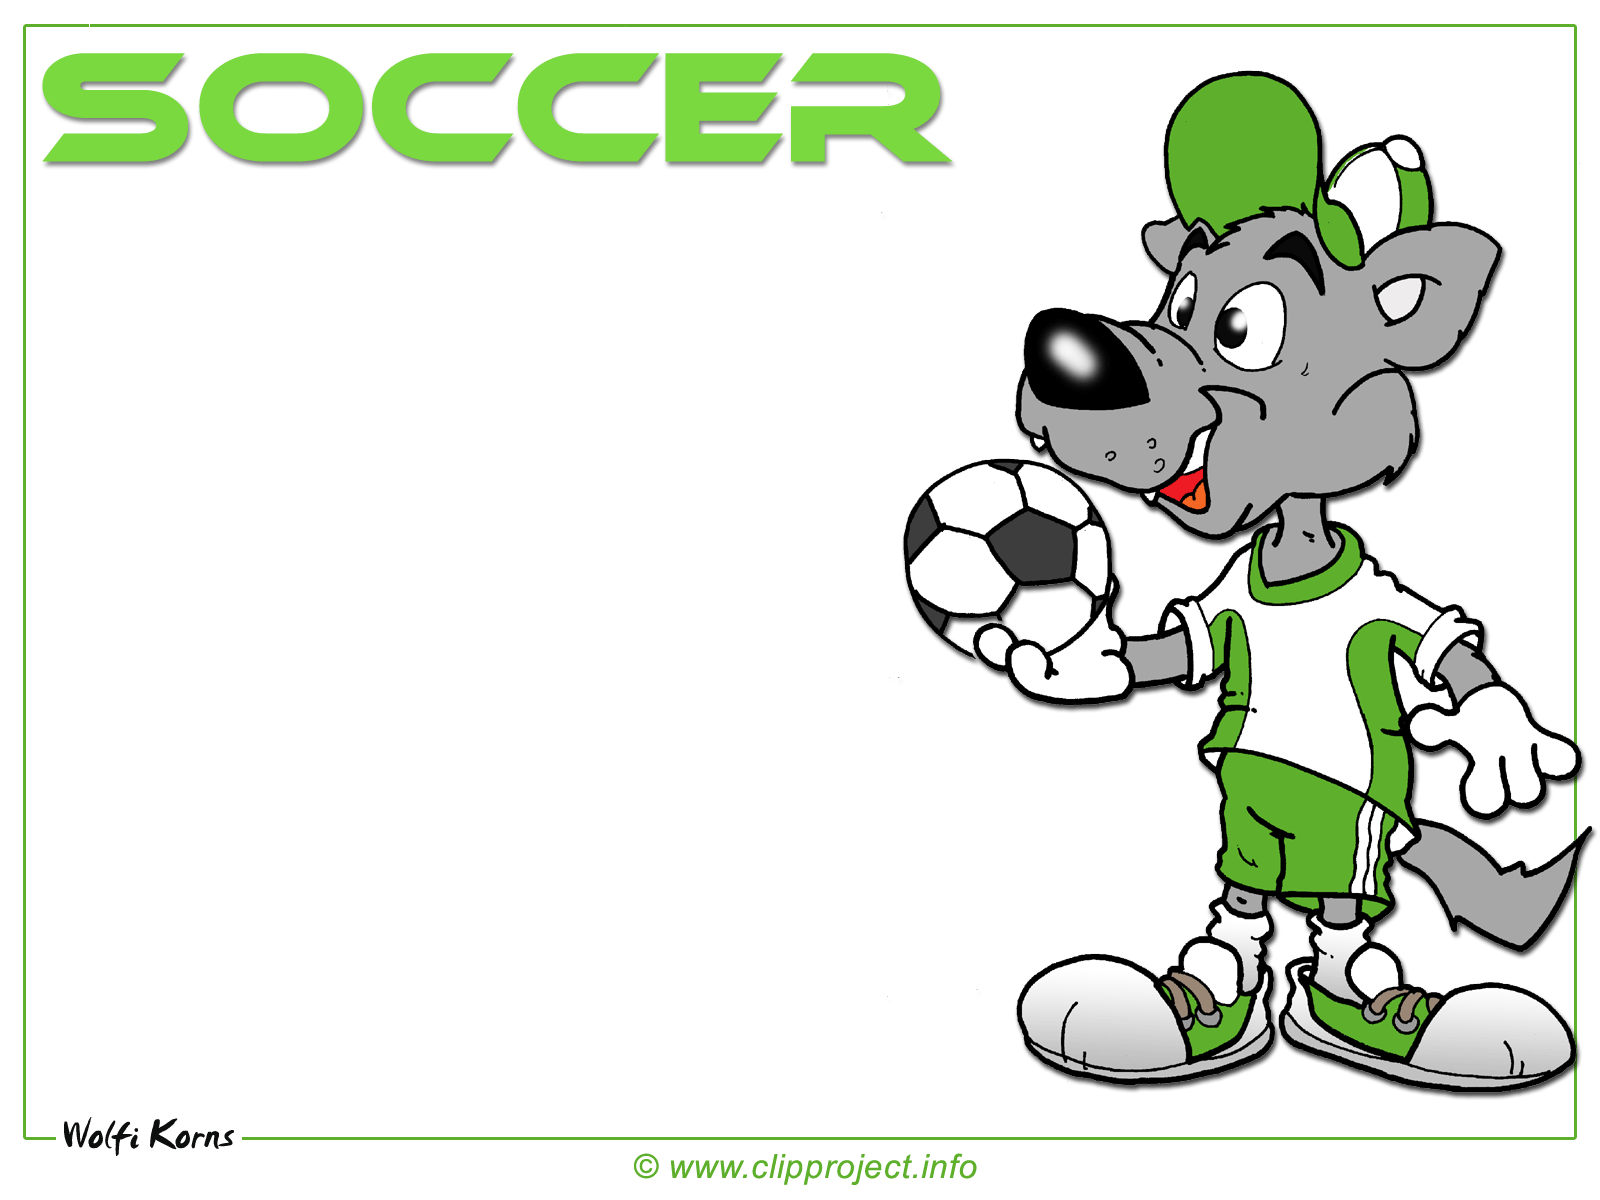 Soccer wallpaper download online free with clipart´images, cartoons, cartoon image in high resolution